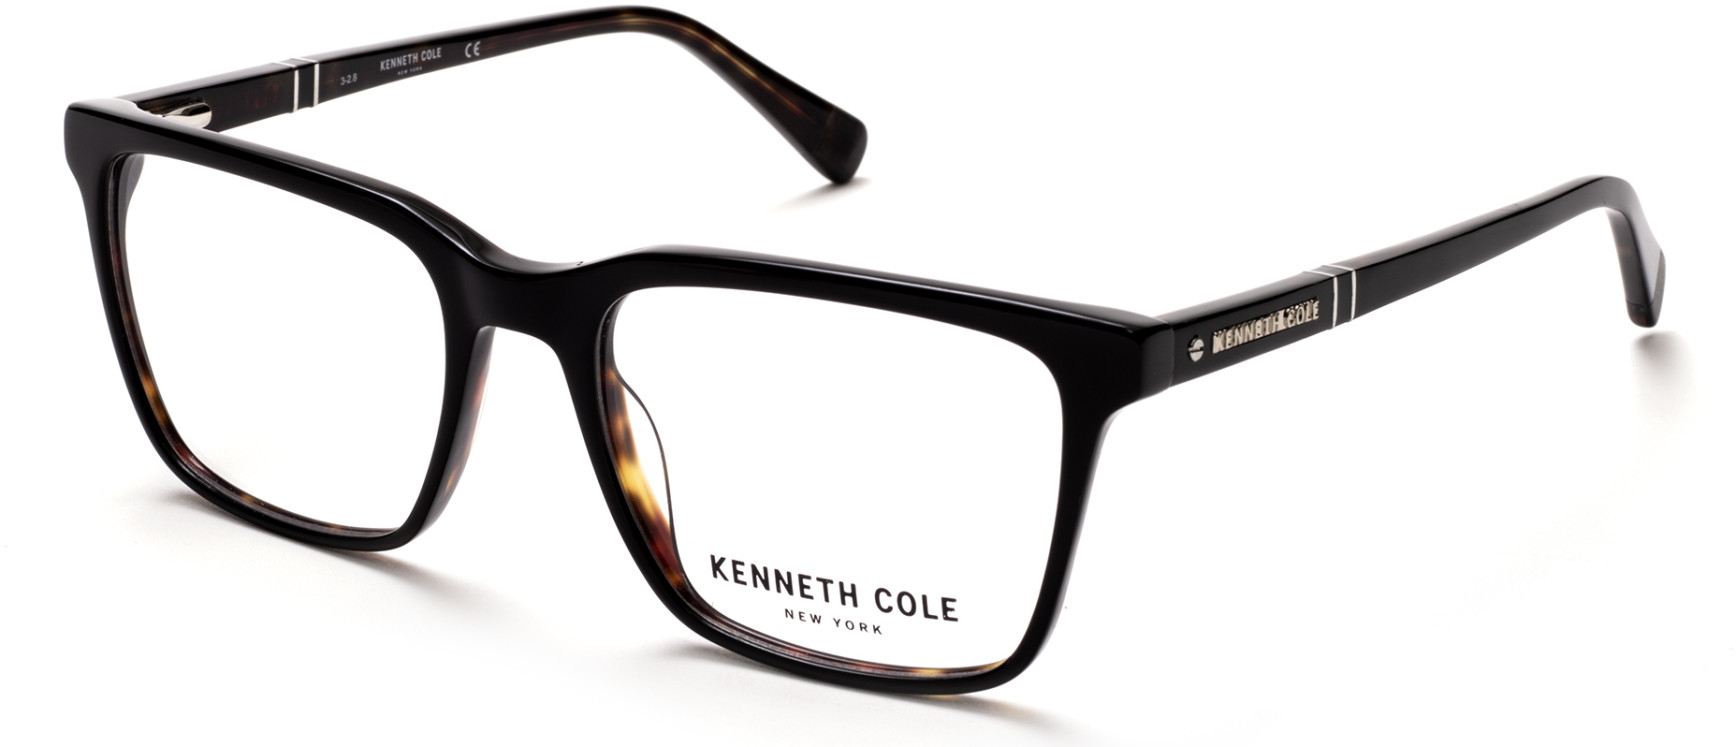 KENNETH COLE NY 0290 005